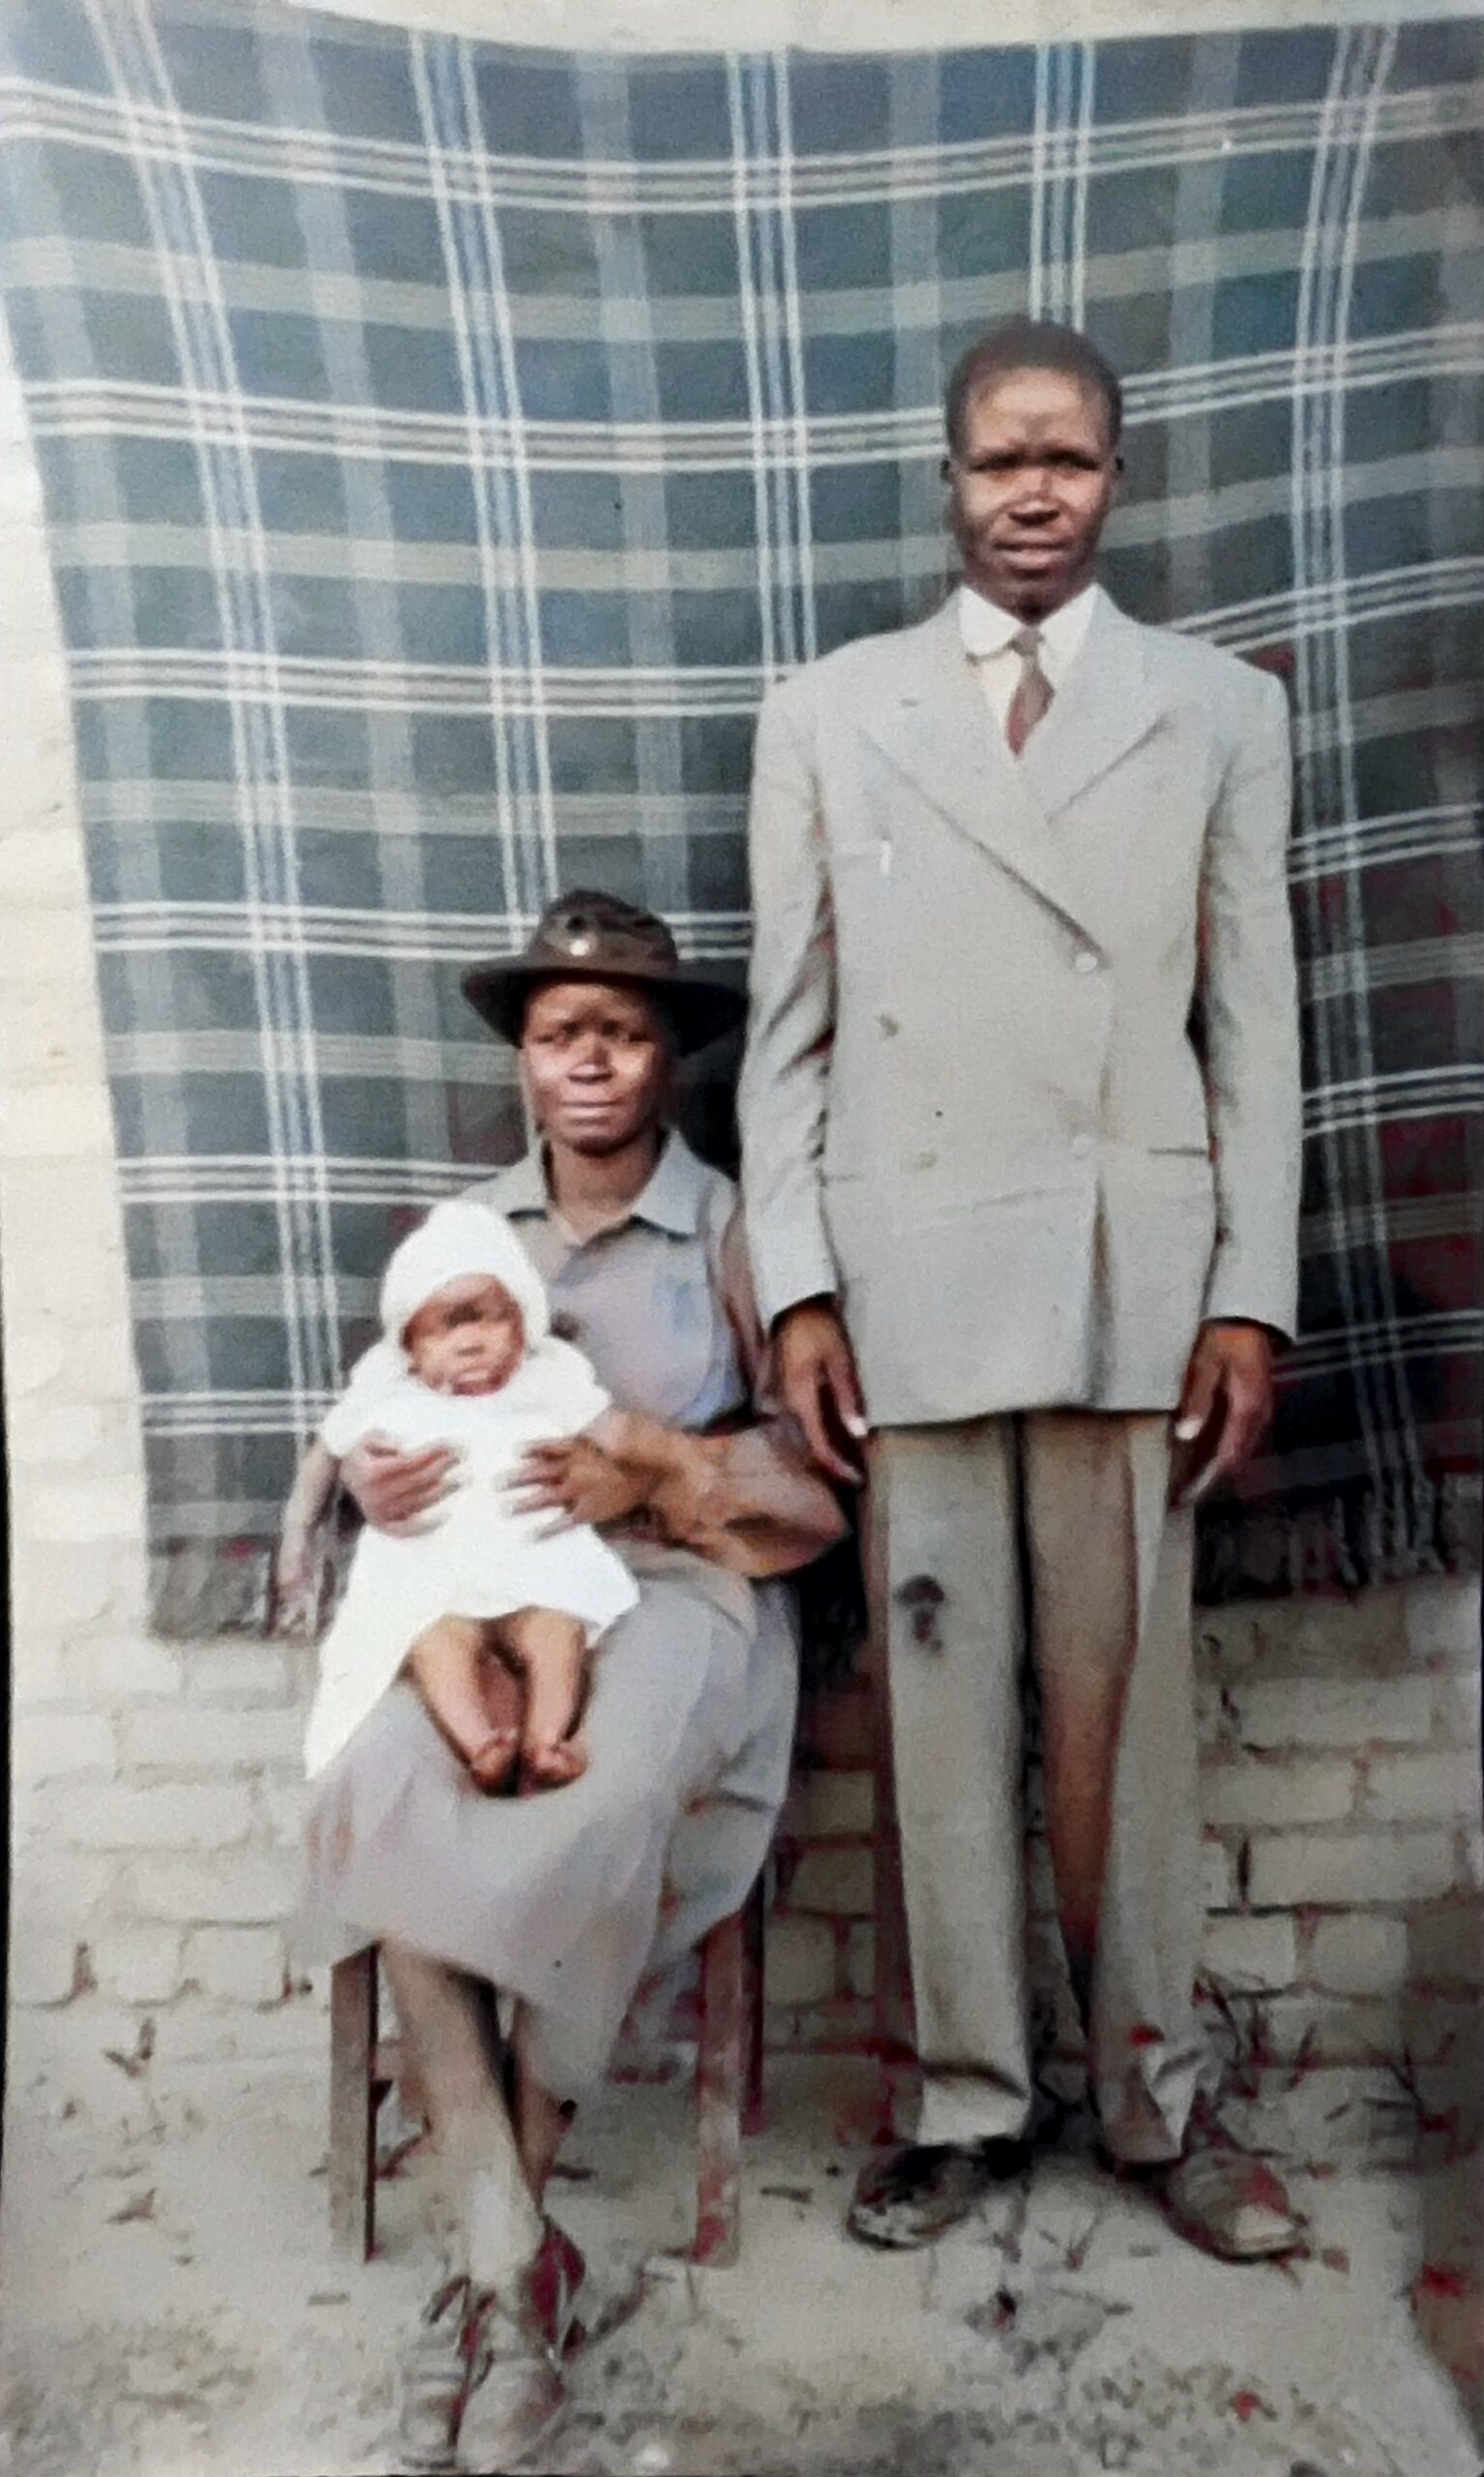 A picture of Black couple posing for a portrait. The woman holds a baby on her lap